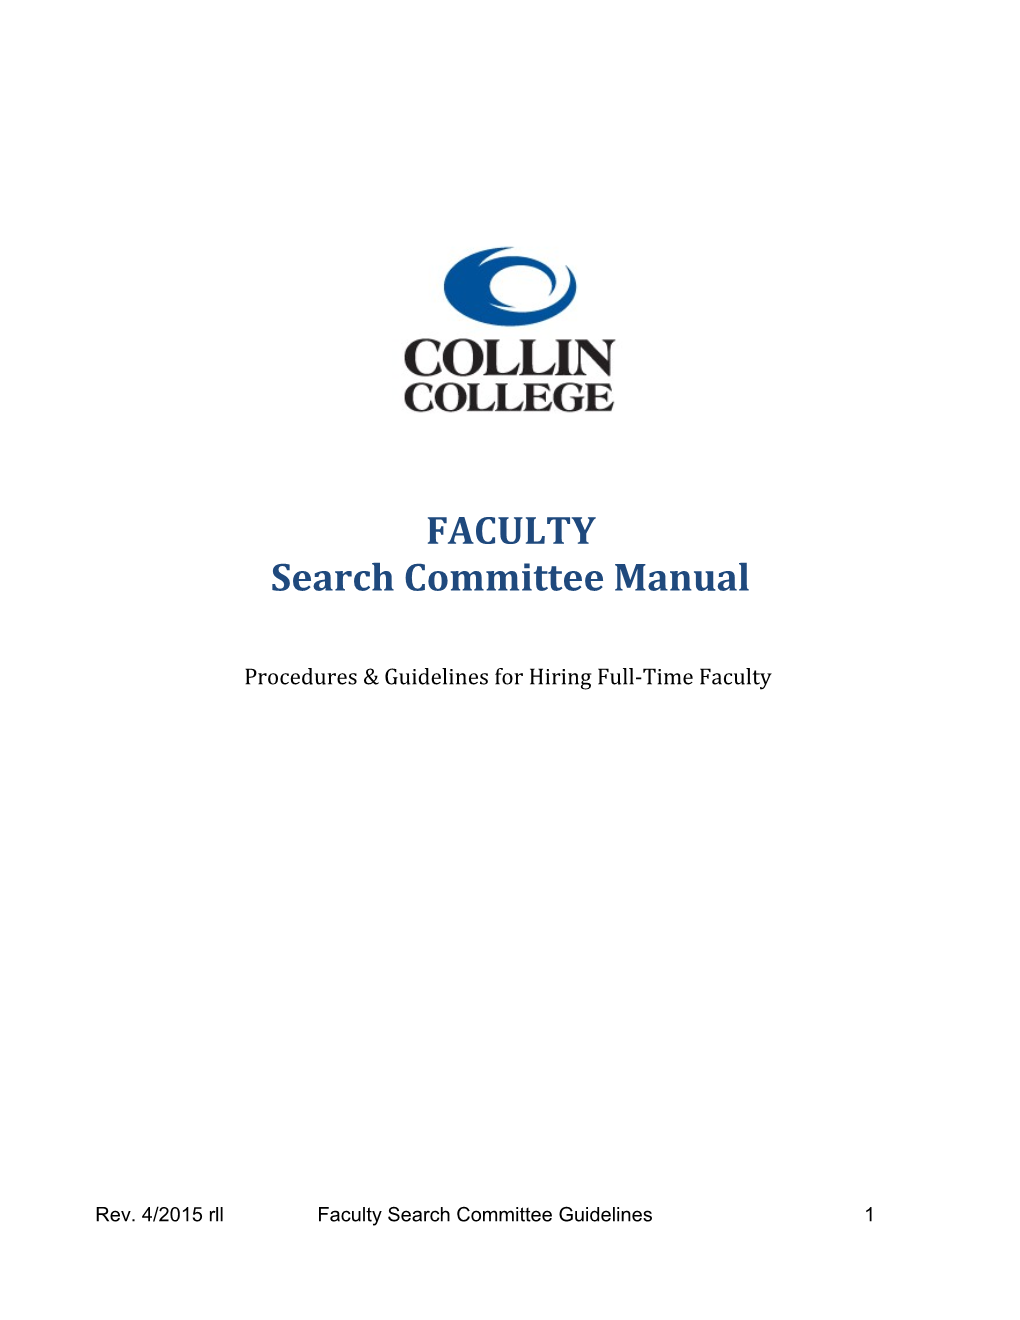 Procedures &Guidelines for Hiring Full-Time Faculty